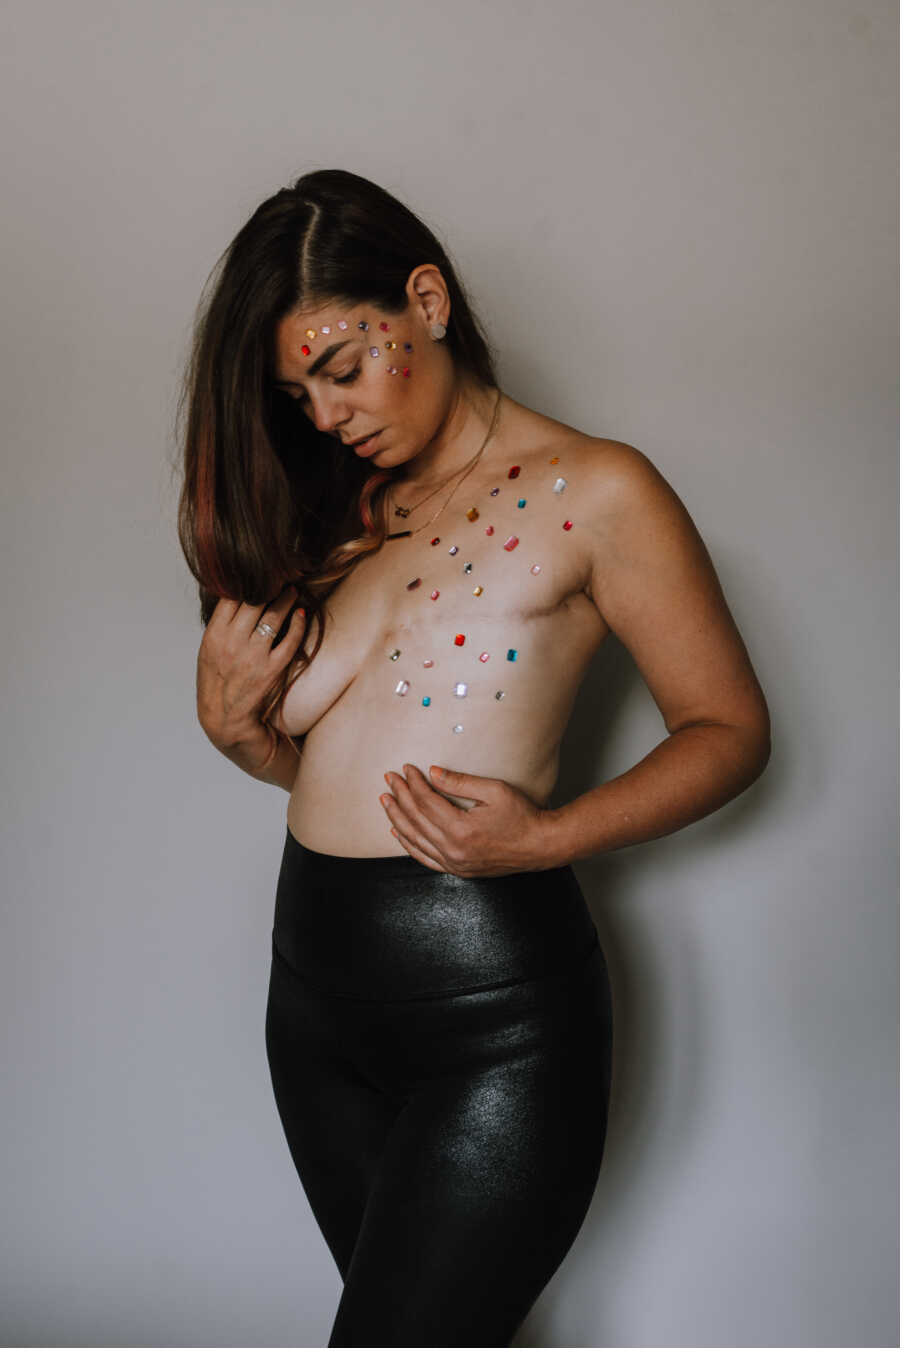 Mastectomy scar covered in colorful stick-on gems